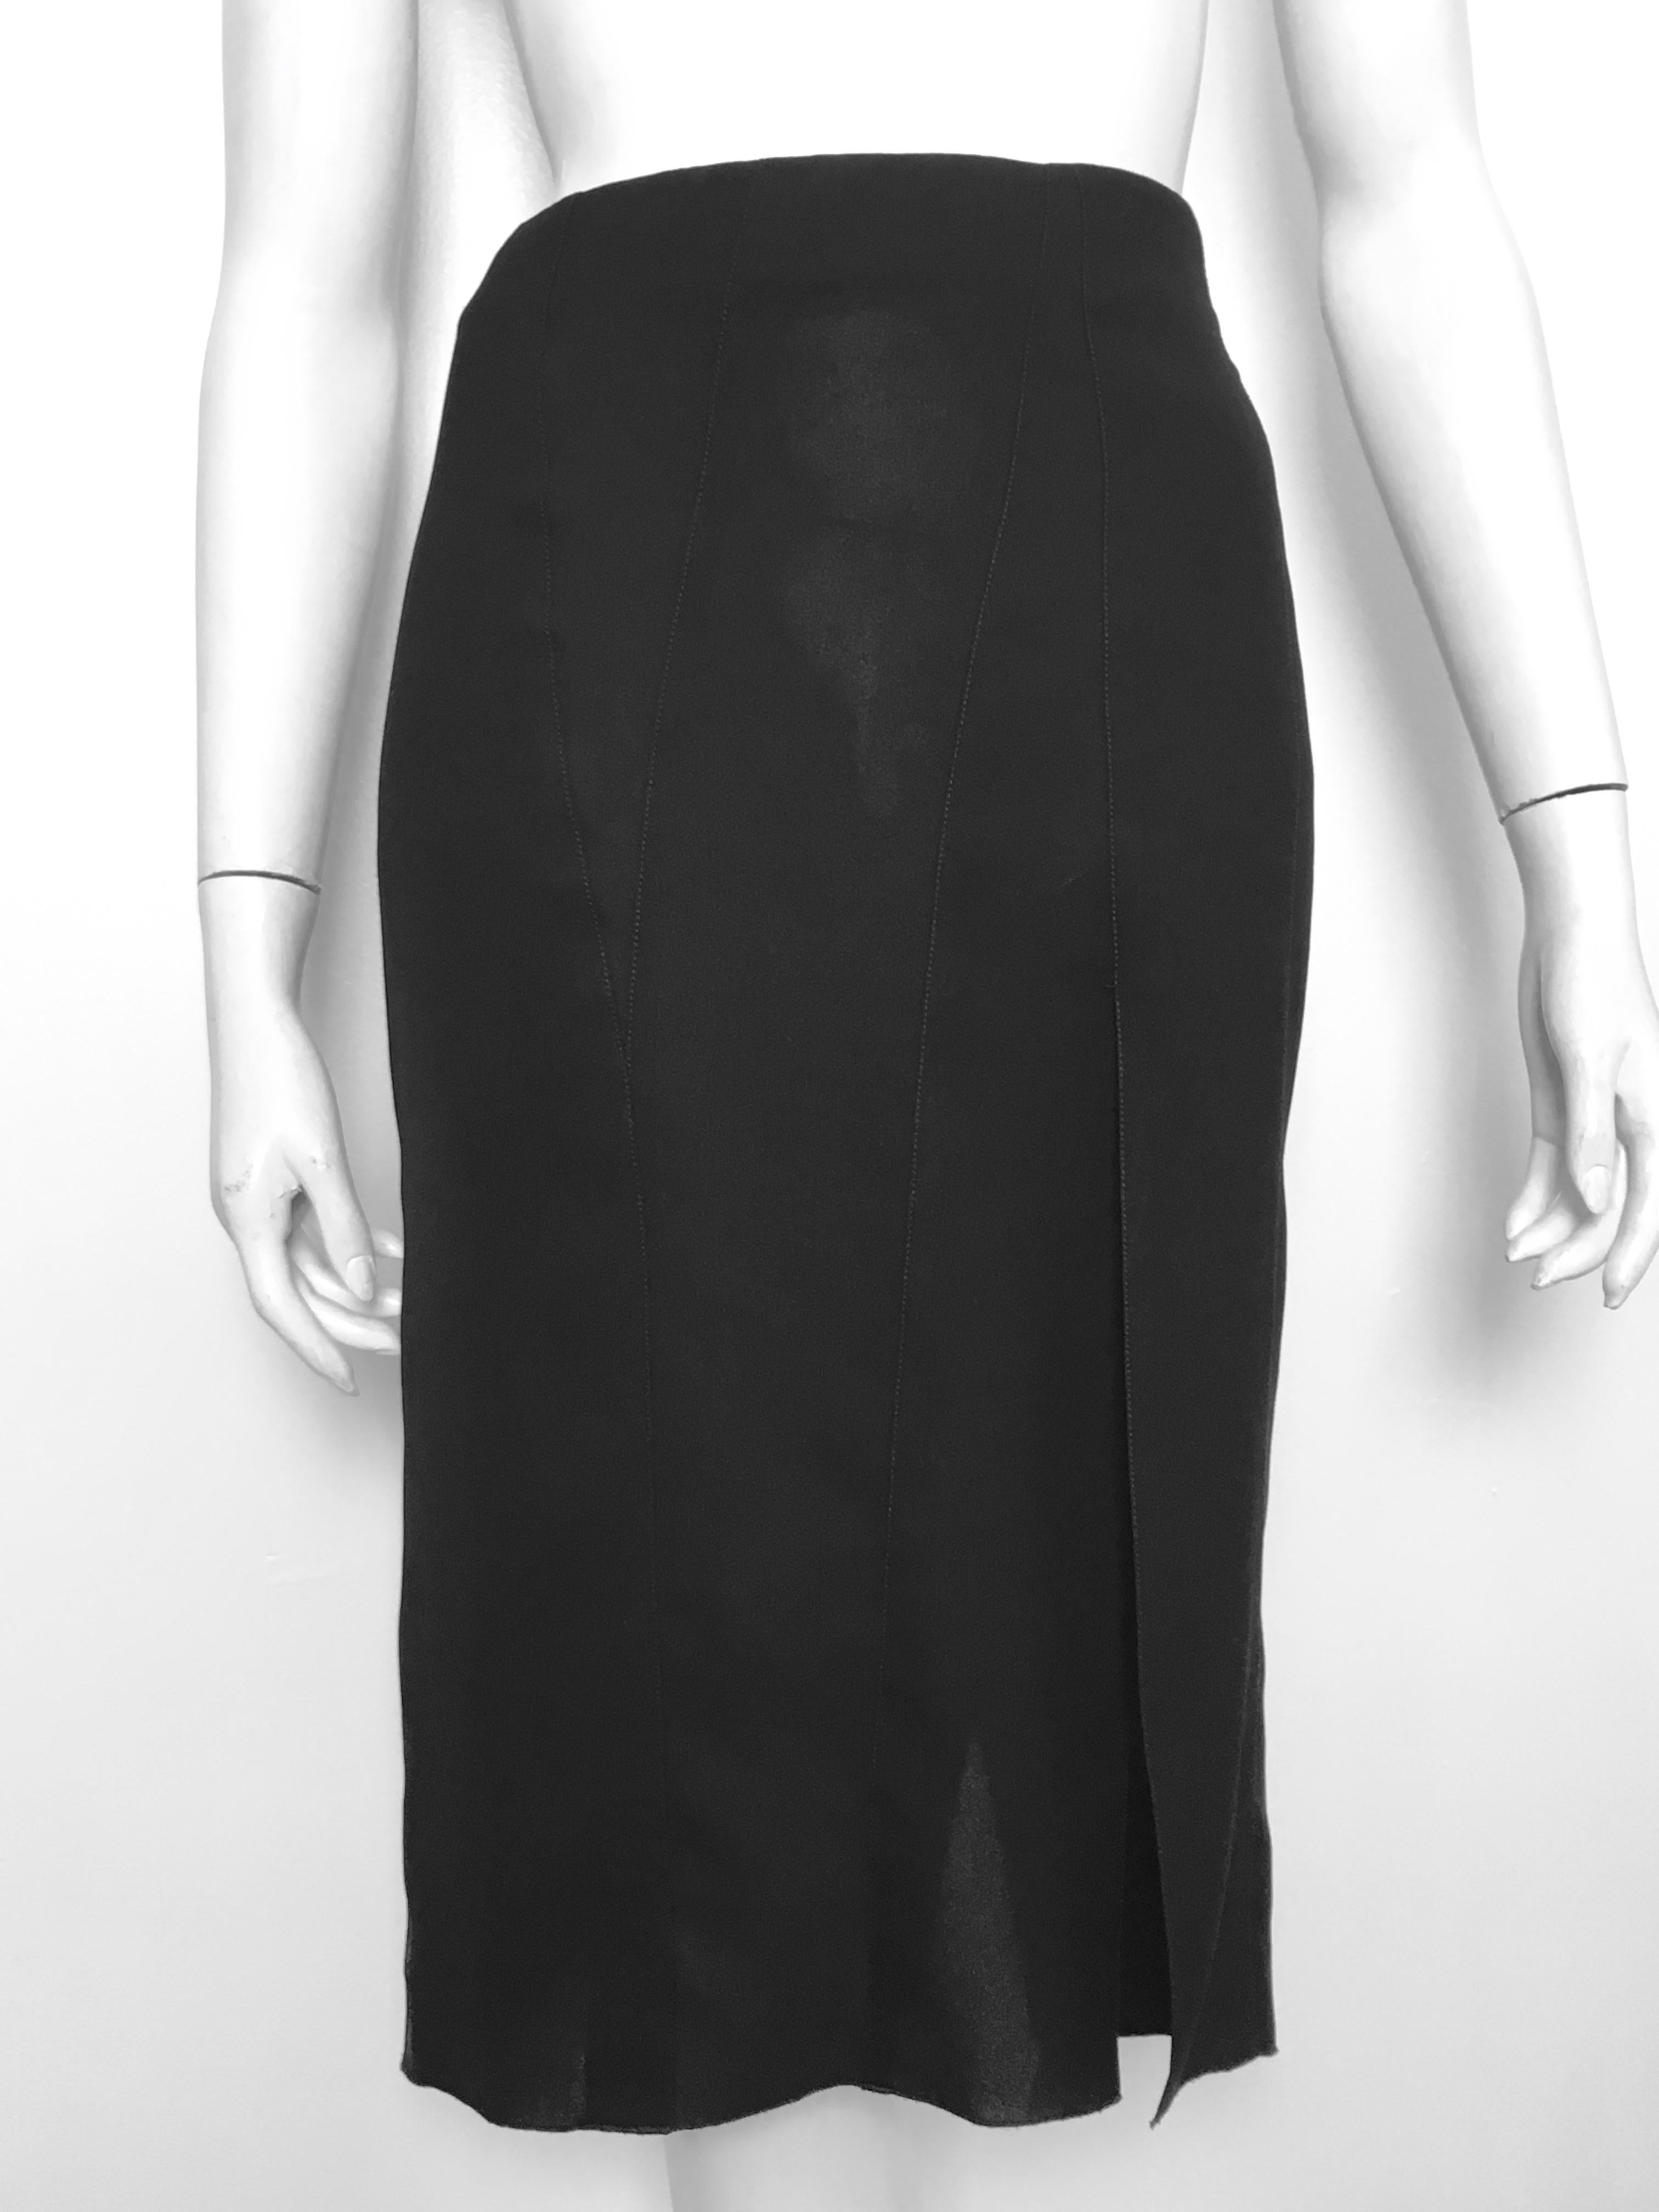 Donna Karan 1990s Black Sheer Skirt Size 8, made in Italy. For Sale 5